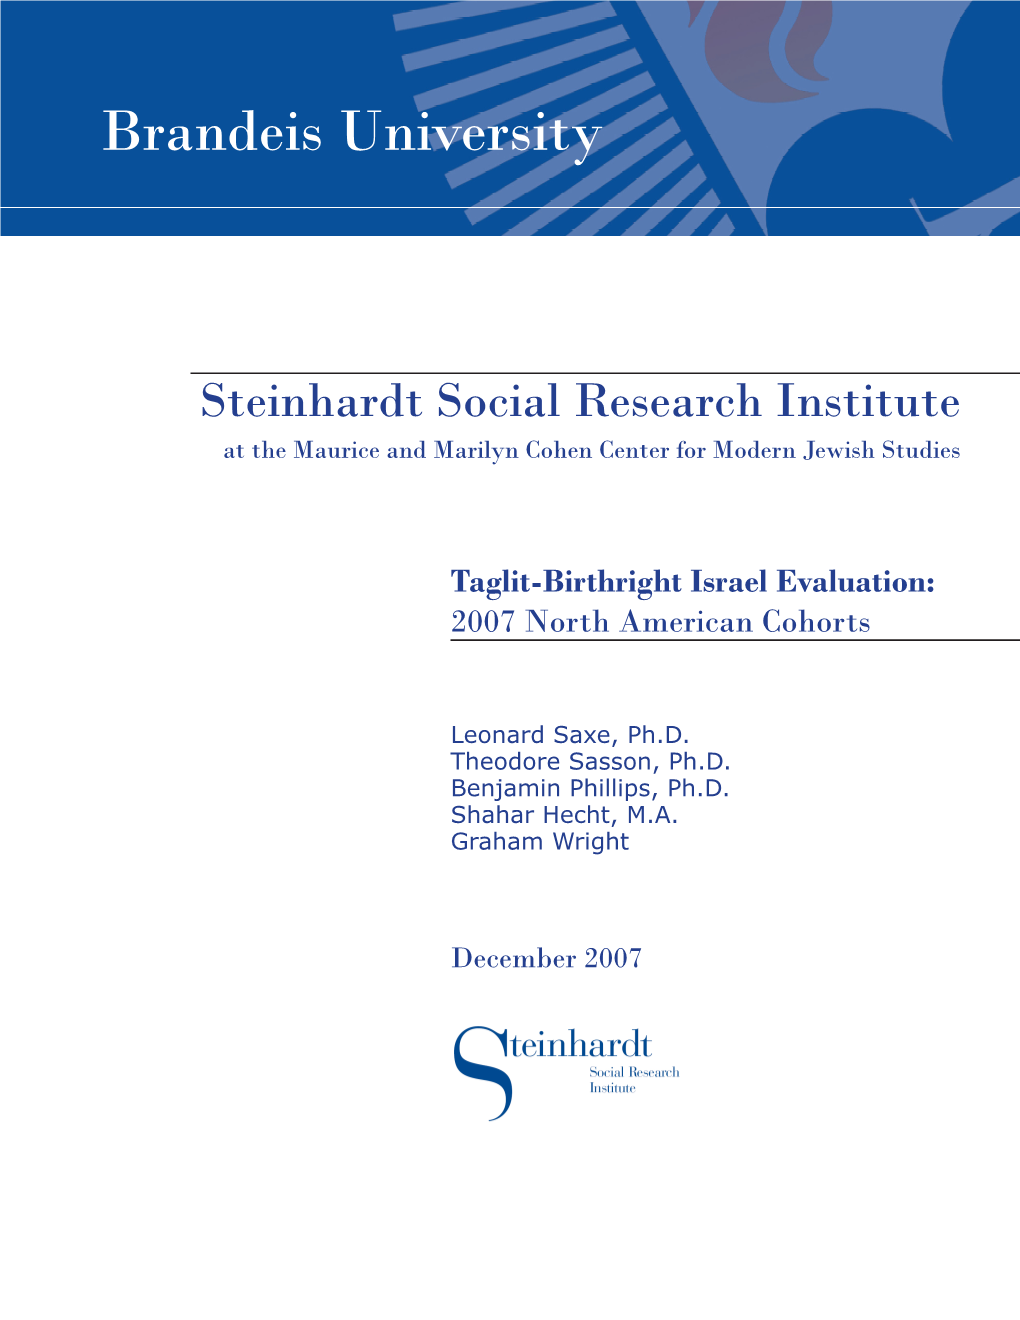 Steinhardt Social Research Institute at the Maurice and Marilyn Cohen Center for Modern Jewish Studies